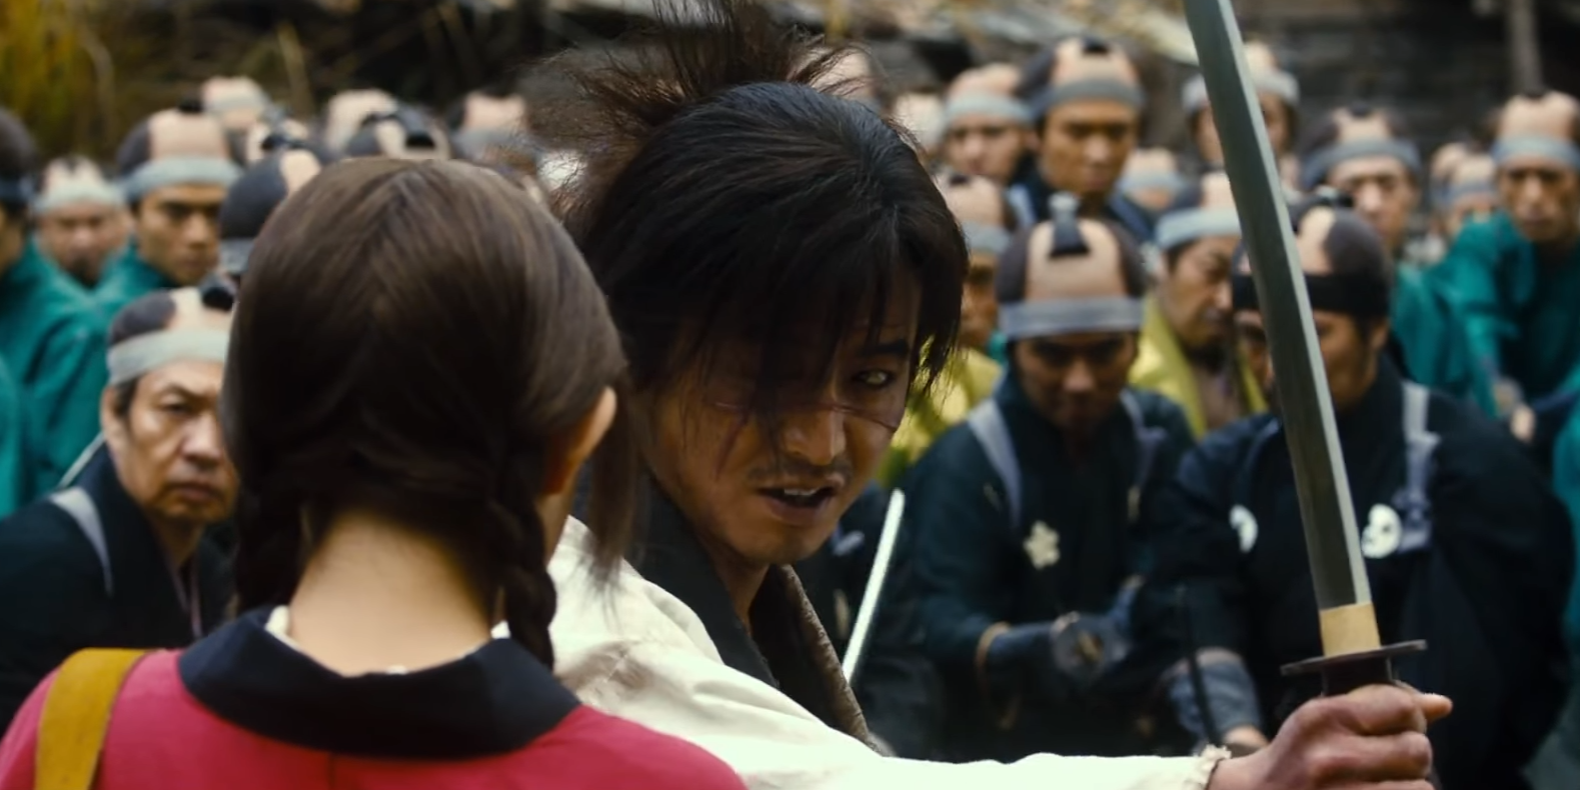 WATCH: Live-Action Blade of the Immortal Trailer Pits One Samurai Against 300